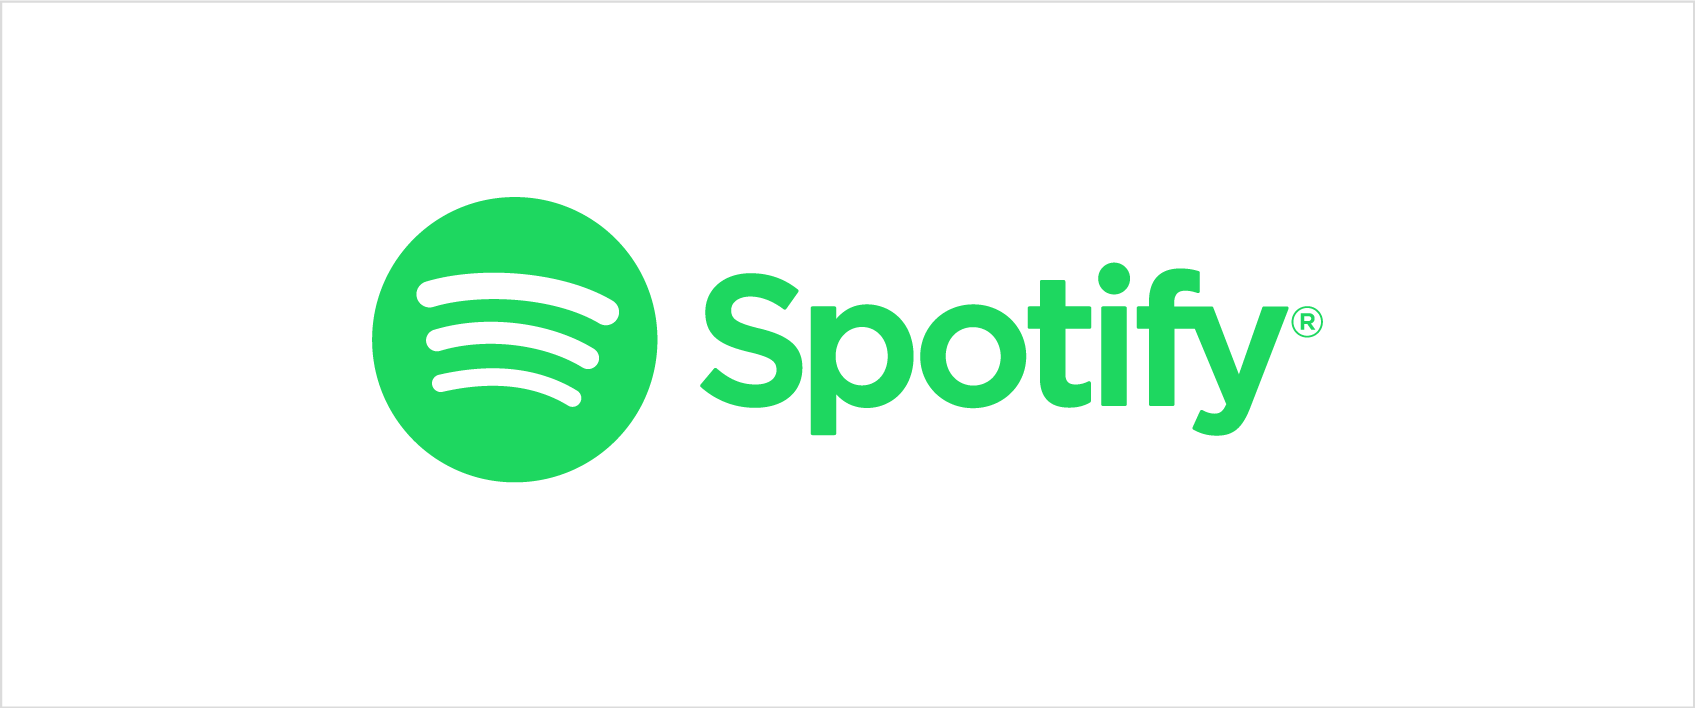 What is Spotify's logo and what does it mean?